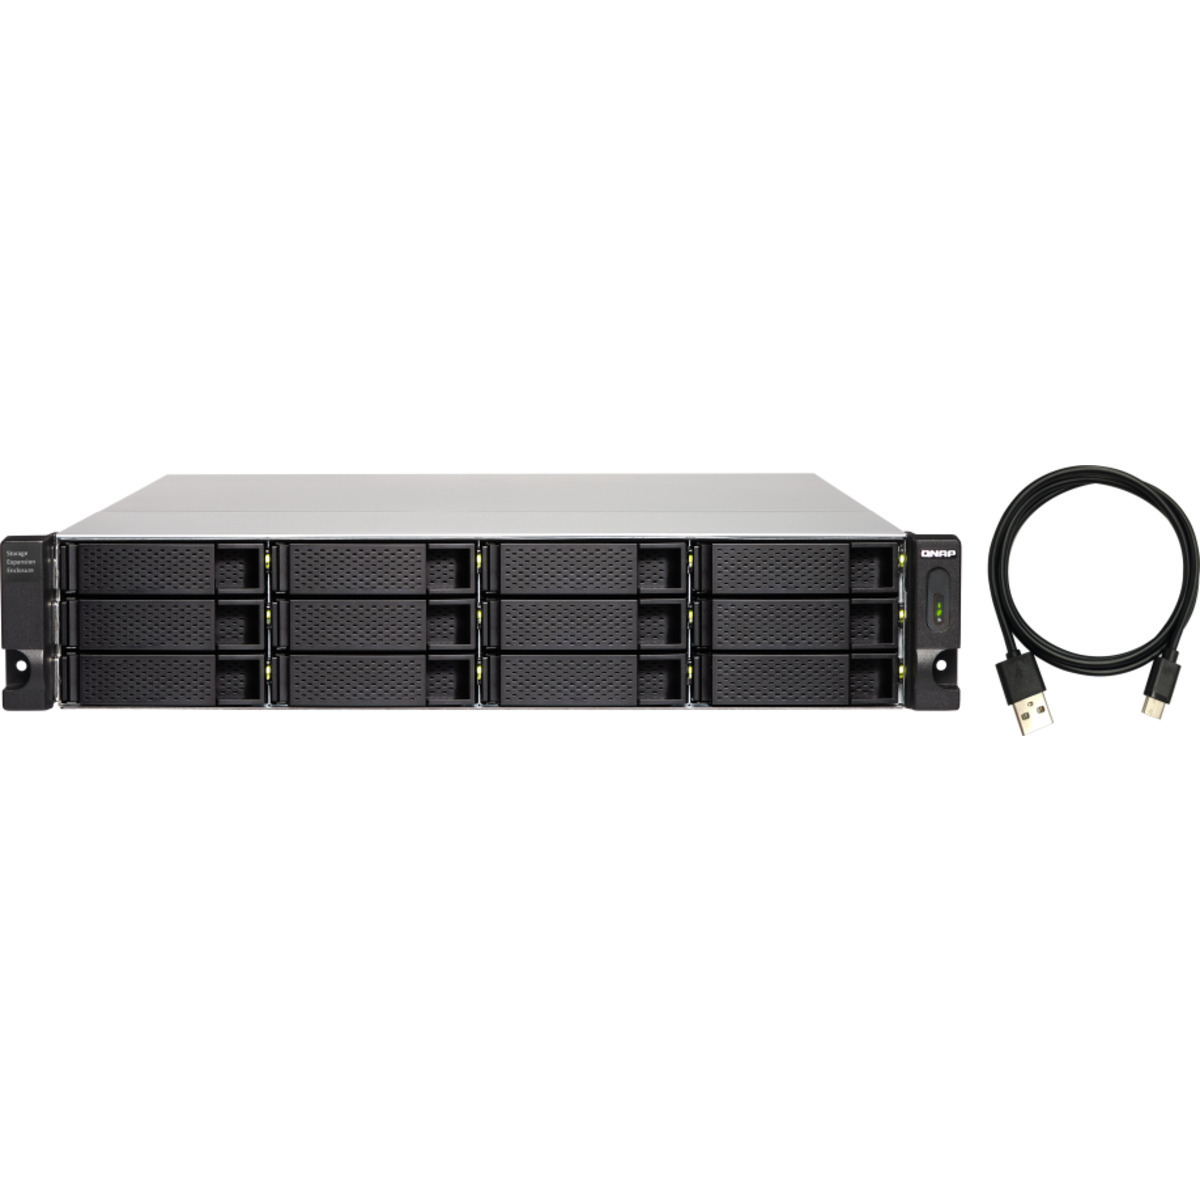 buy $4811 QNAP TL-R1200C-RP External Expansion Drive 192tb RackMount Expansion Enclosure 12x16000gb Toshiba Enterprise Capacity MG08ACA16TE 3.5 7200rpm SATA 6Gb/s HDD ENTERPRISE Class Drives Installed - Burn-In Tested - nas headquarters buy network attached storage server device das new raid-5 free shipping simply usa TL-R1200C-RP External Expansion Drive